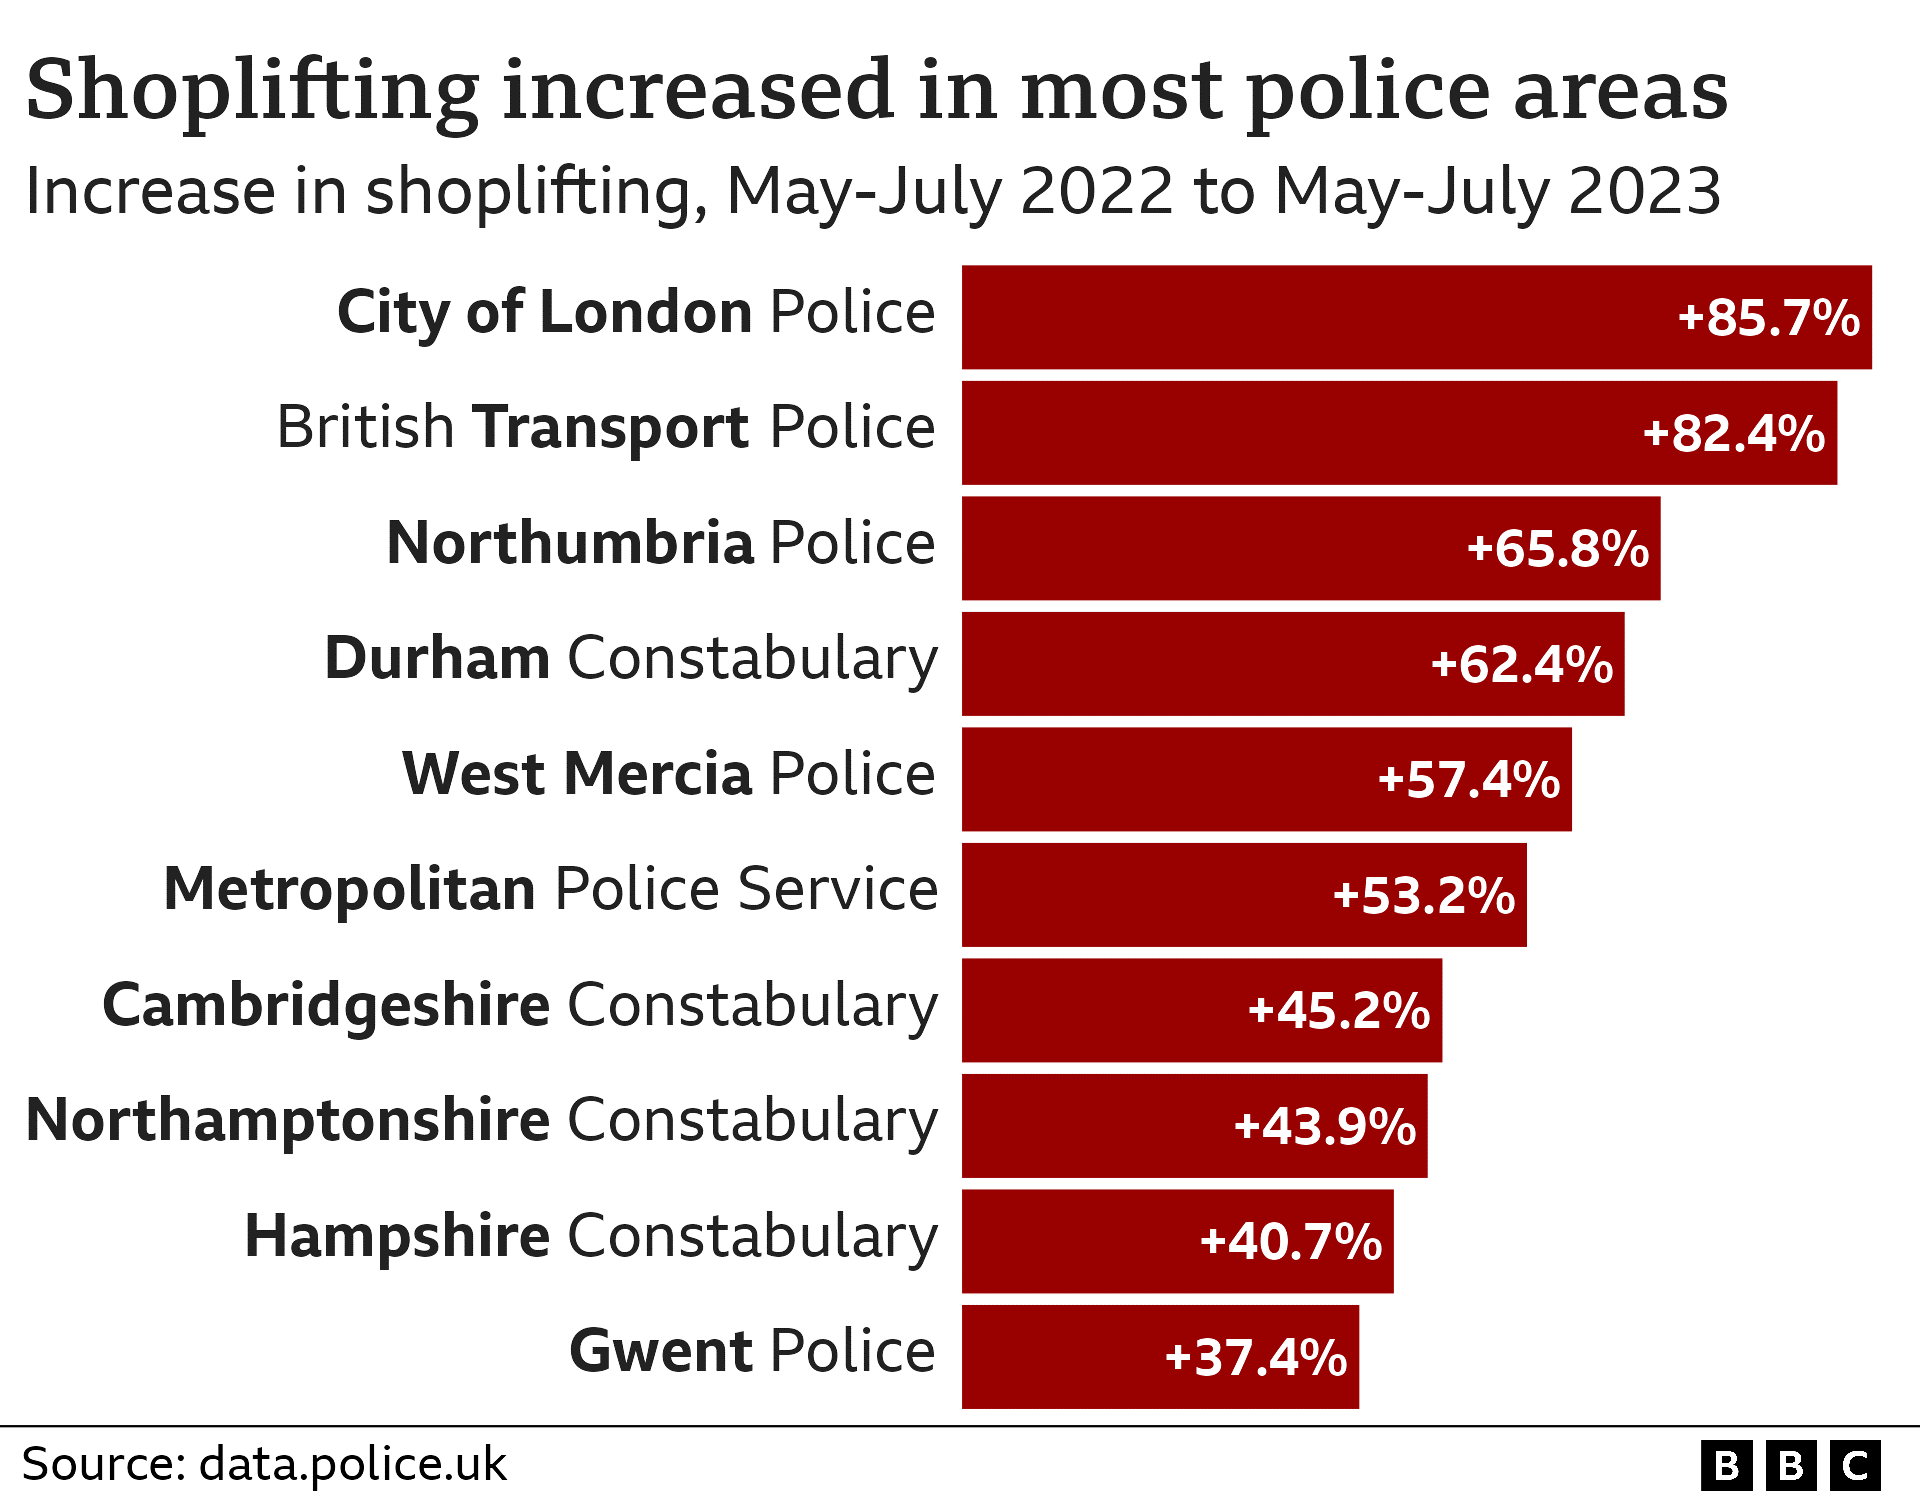 Shoplifting increased in most police areas